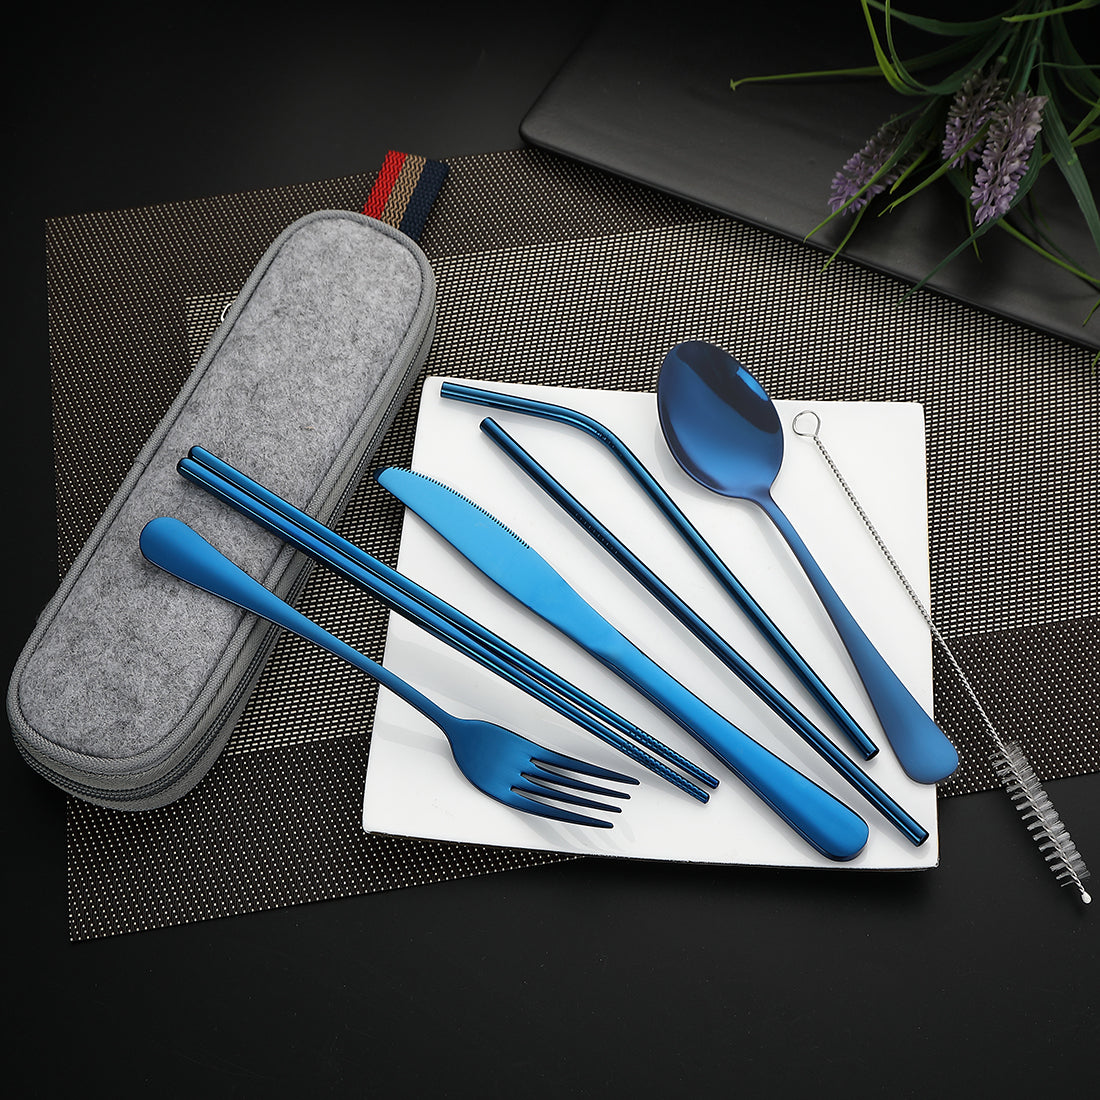 Devico Portable Utensils, Travel Camping Cutlery Set, 8-Piece including Knife Fork Spoon Chopsticks Cleaning Brush Straws Portable Case, Stainless Steel Flatware set (8-piece Blue)